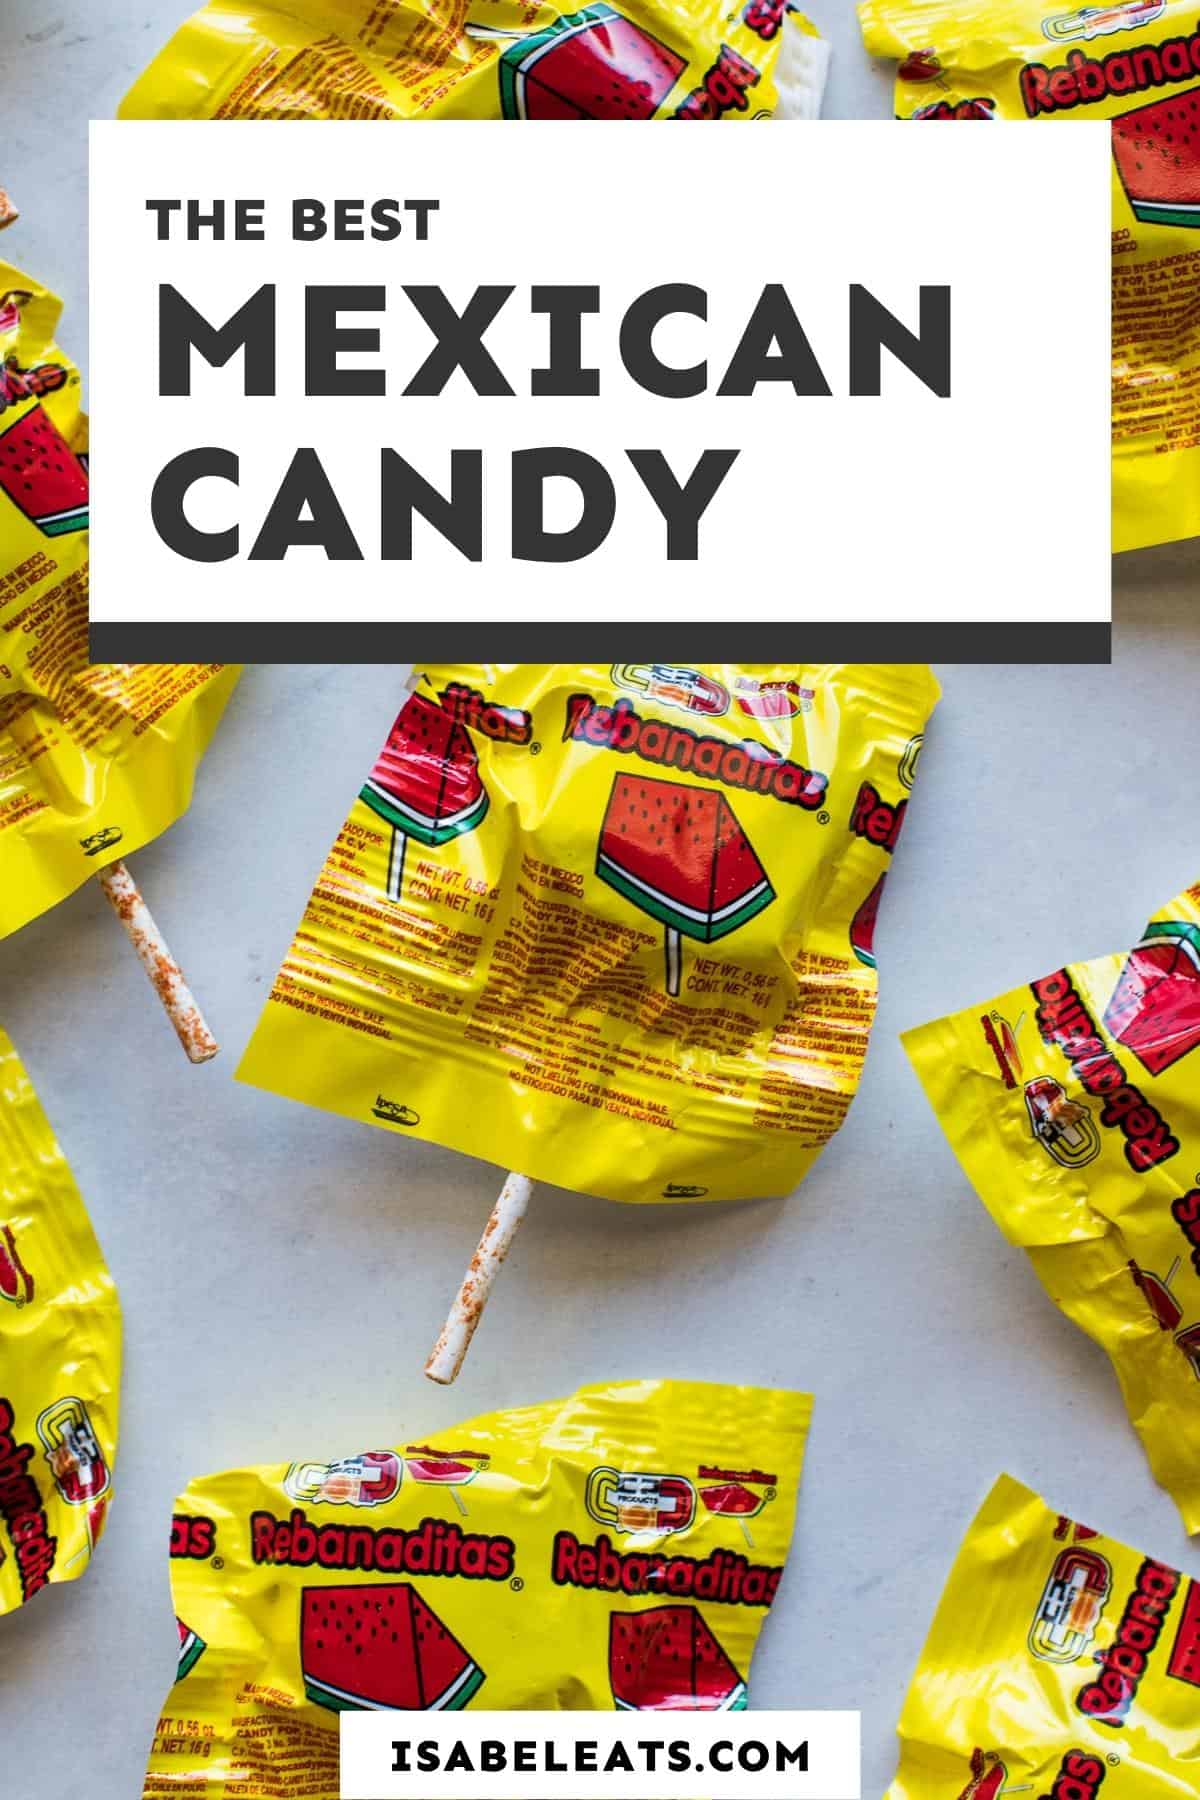 The Best Mexican Candy (Top 10 Most Popular)